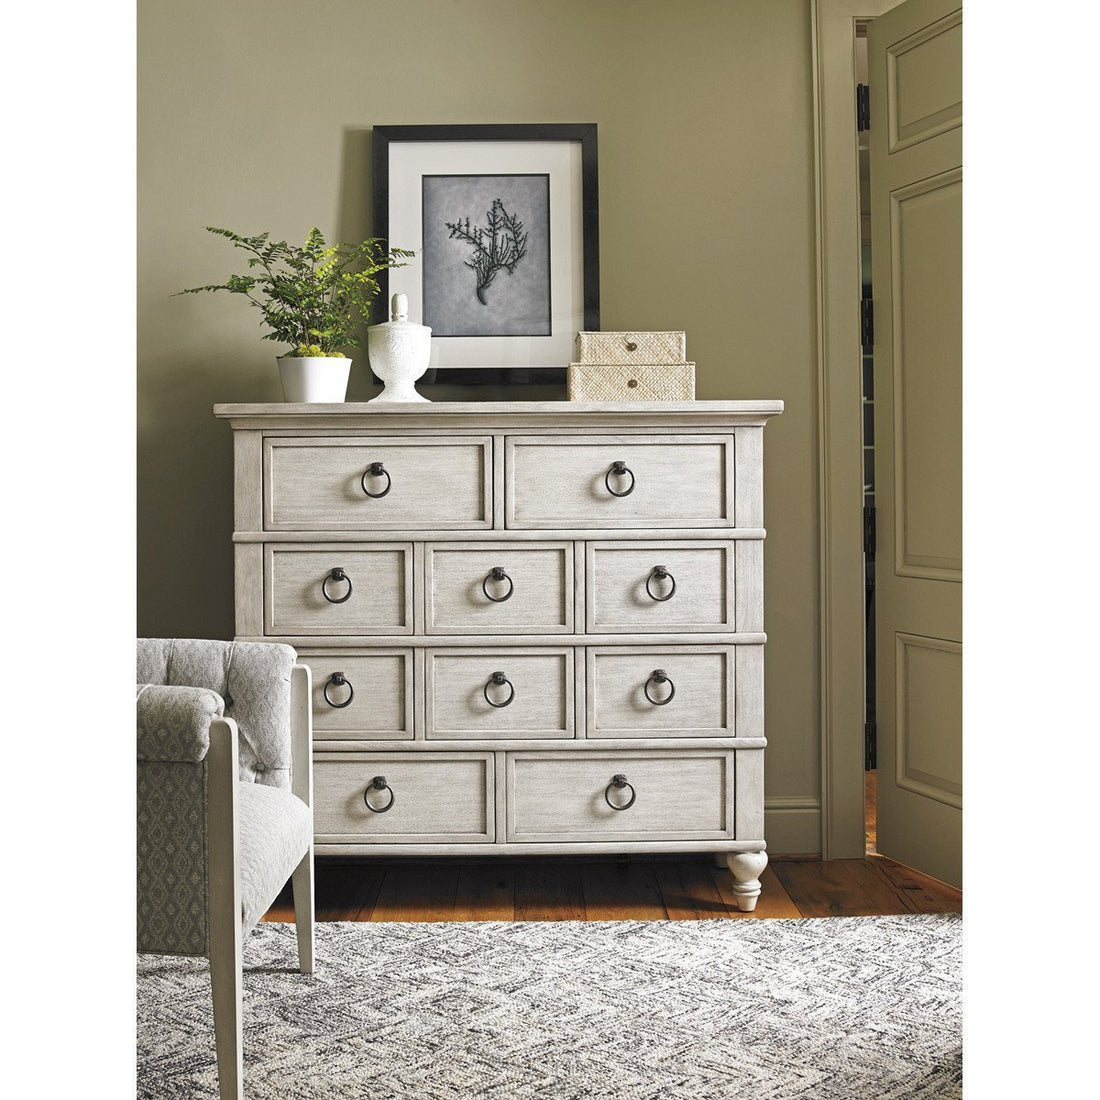 Lexington Oyster Bay Fall River Drawer Chest